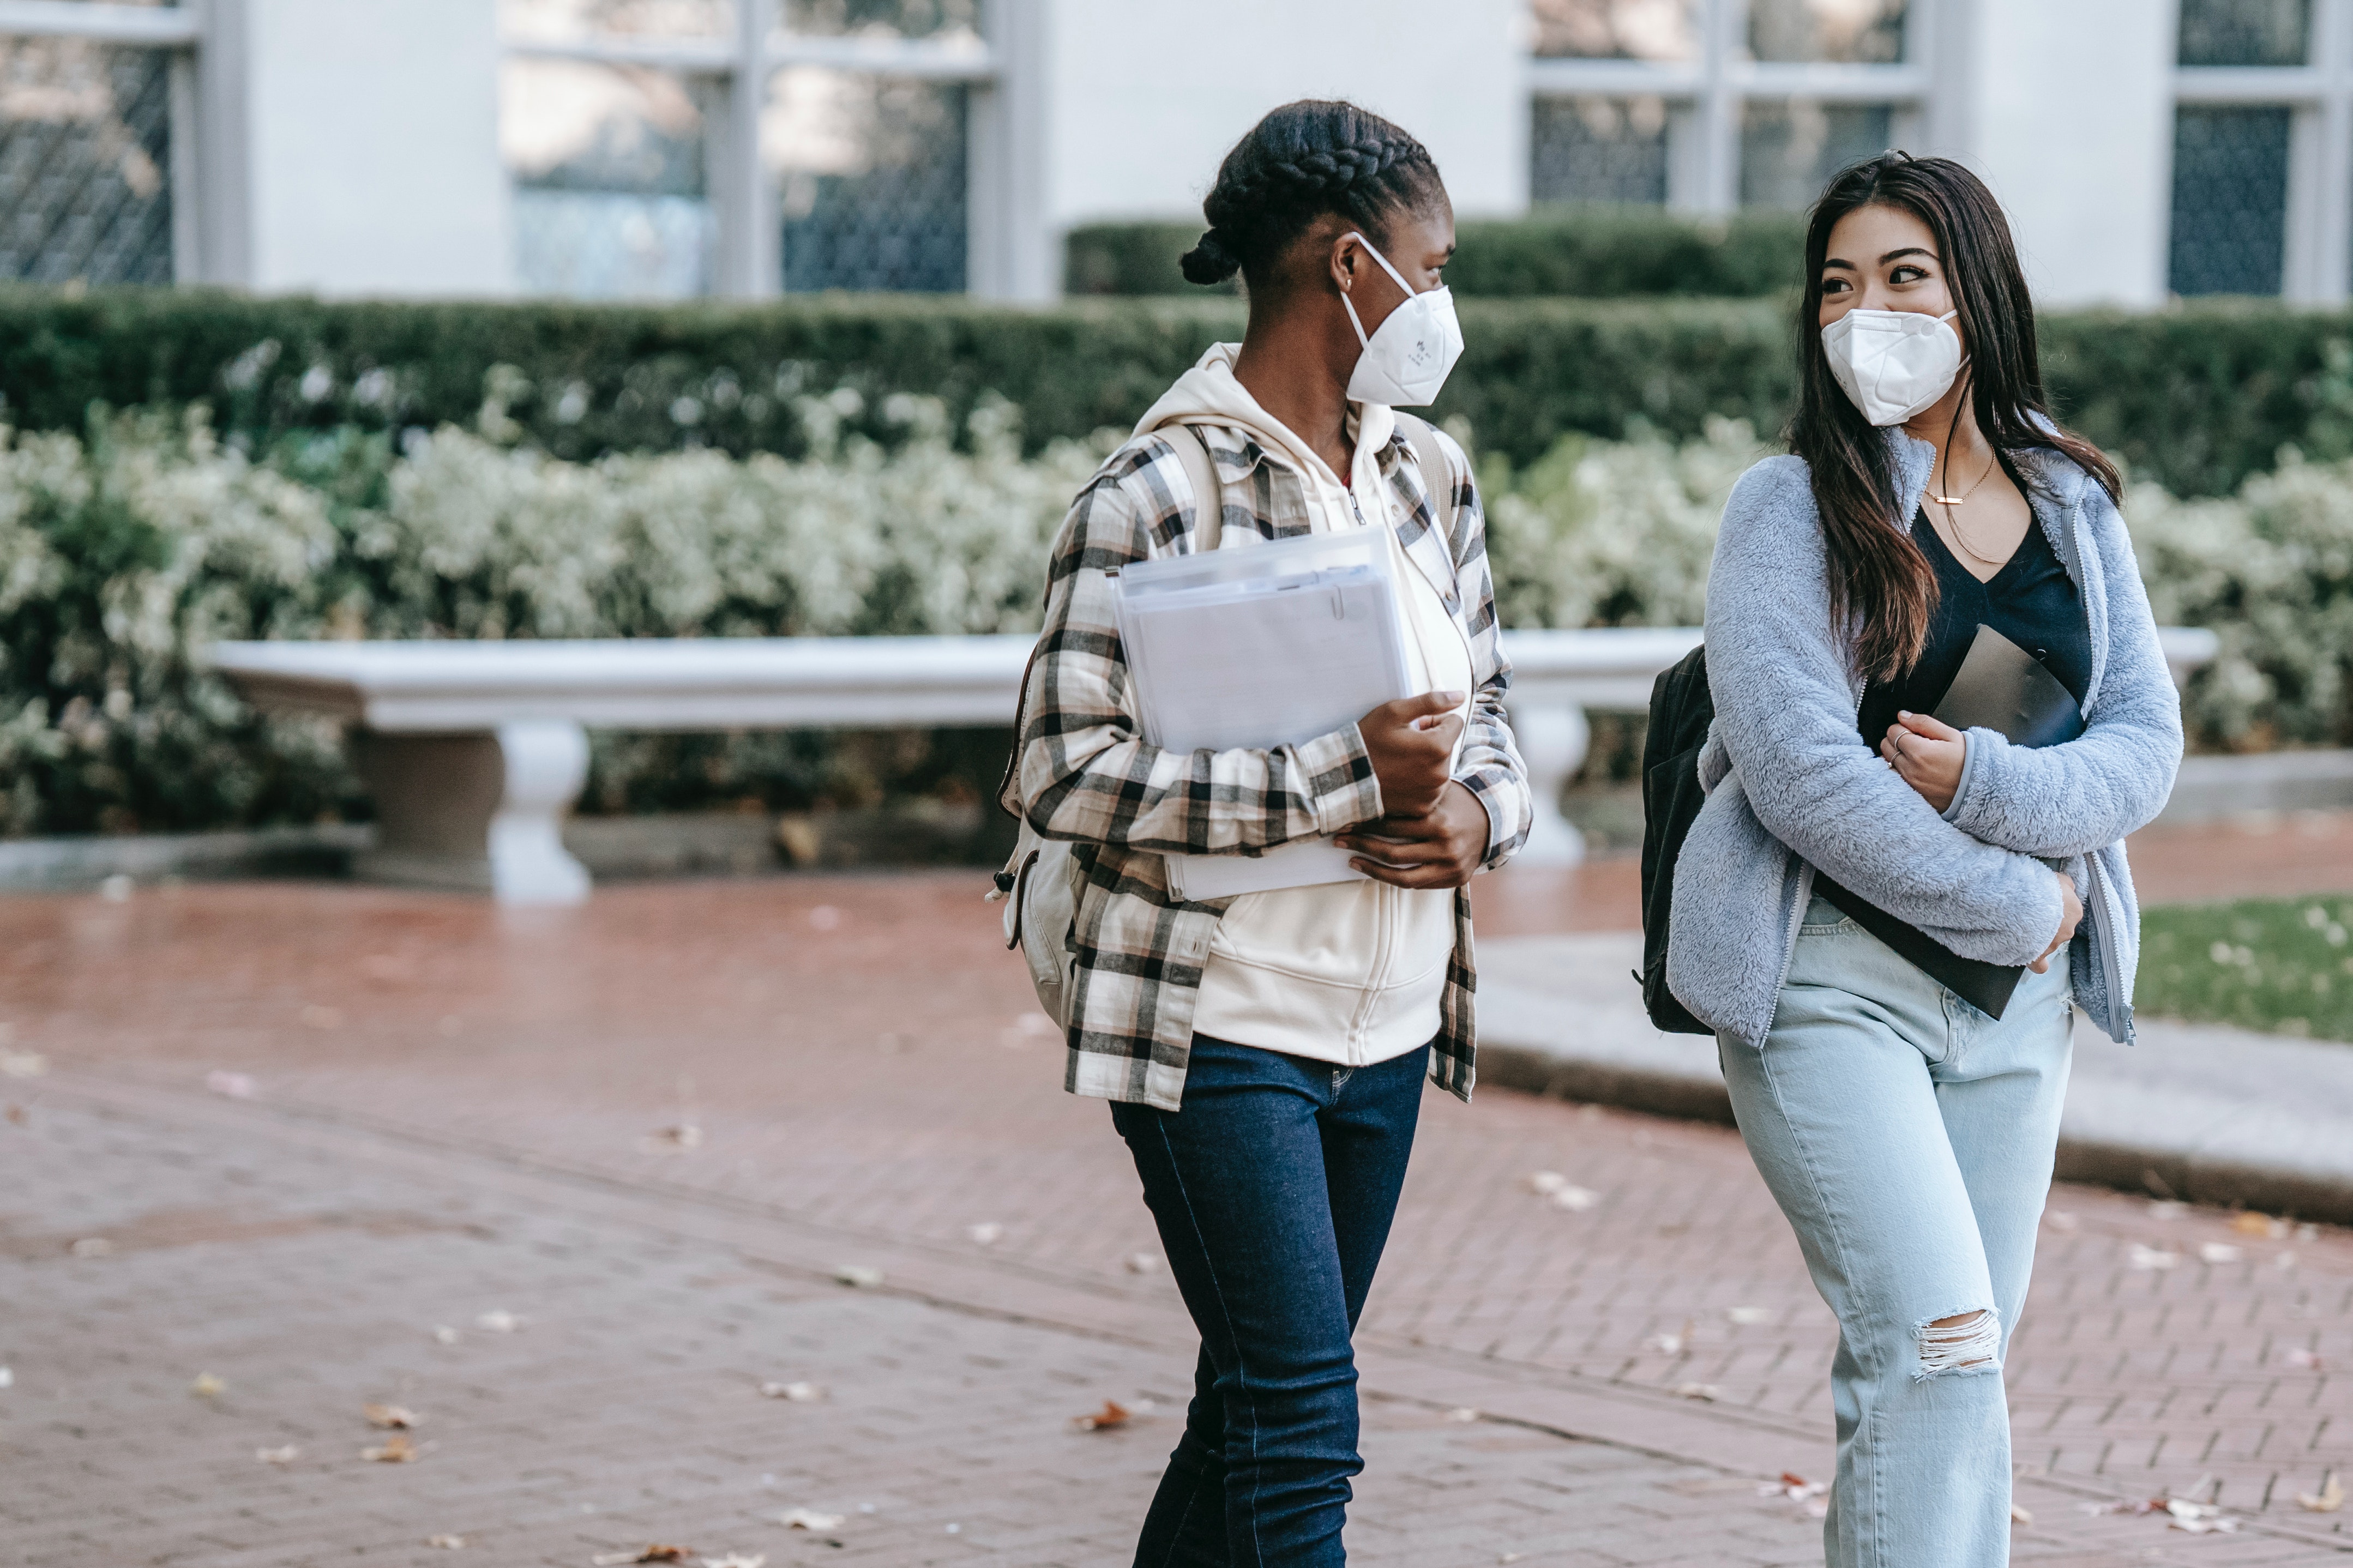 Two people walking outside together wearing face masks